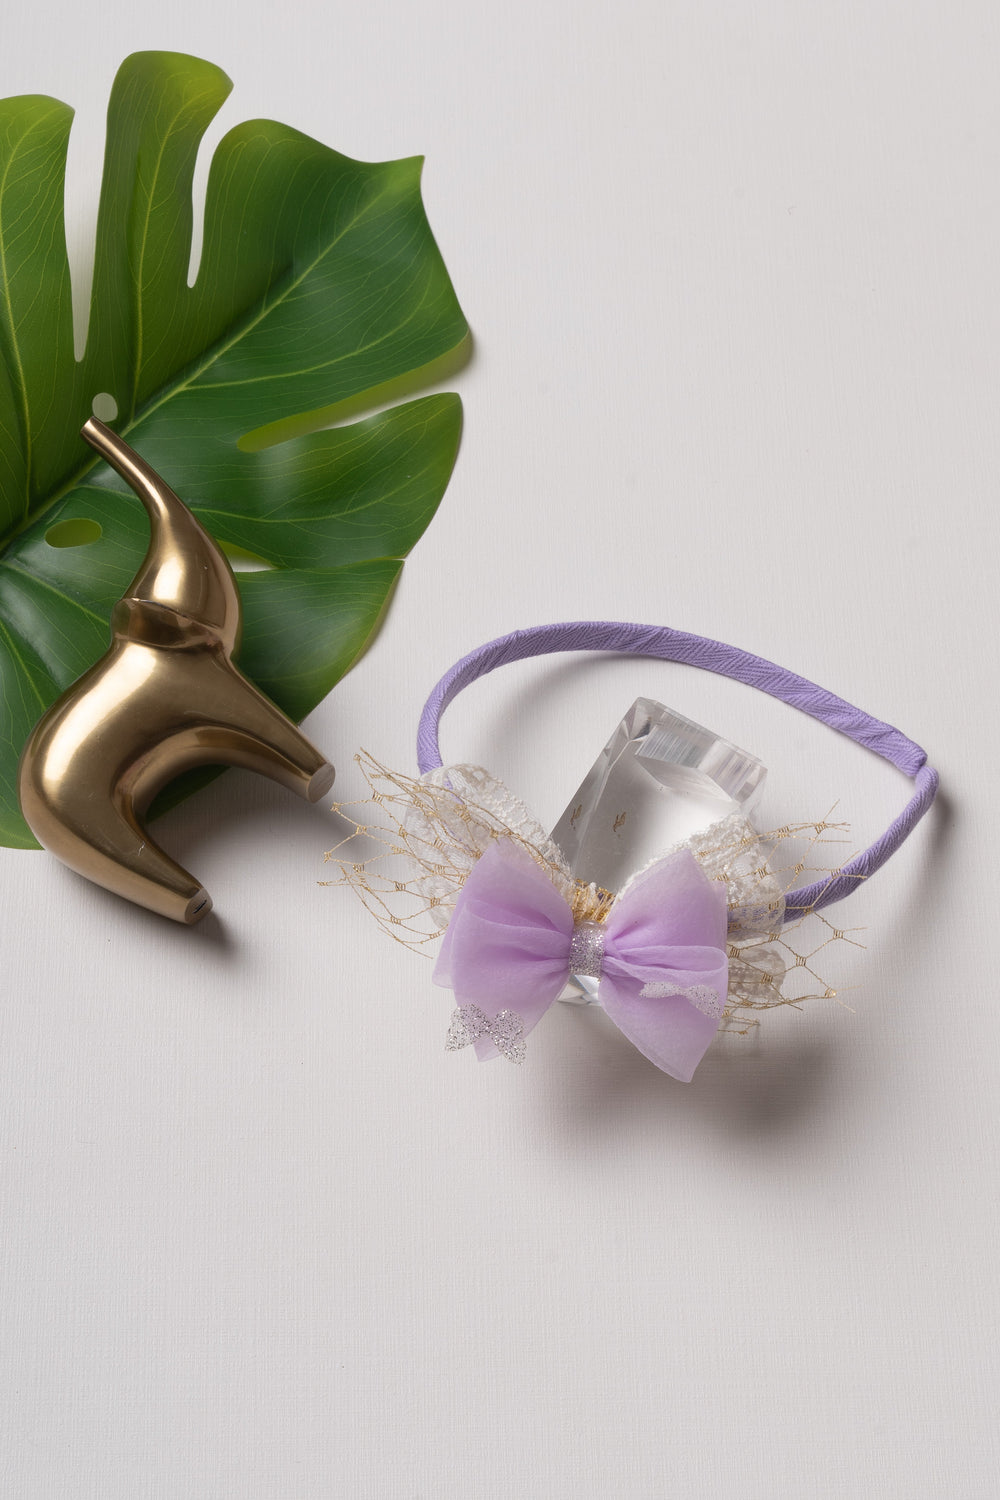 The Nesavu Hair Band Lavender Dream Butterfly Hairbow with Golden Lace Accents Nesavu Purple JHB79C Glitter Lavender Bow with Gold Lace | Hair Accessory for Stylish Outfits | The Nesavu